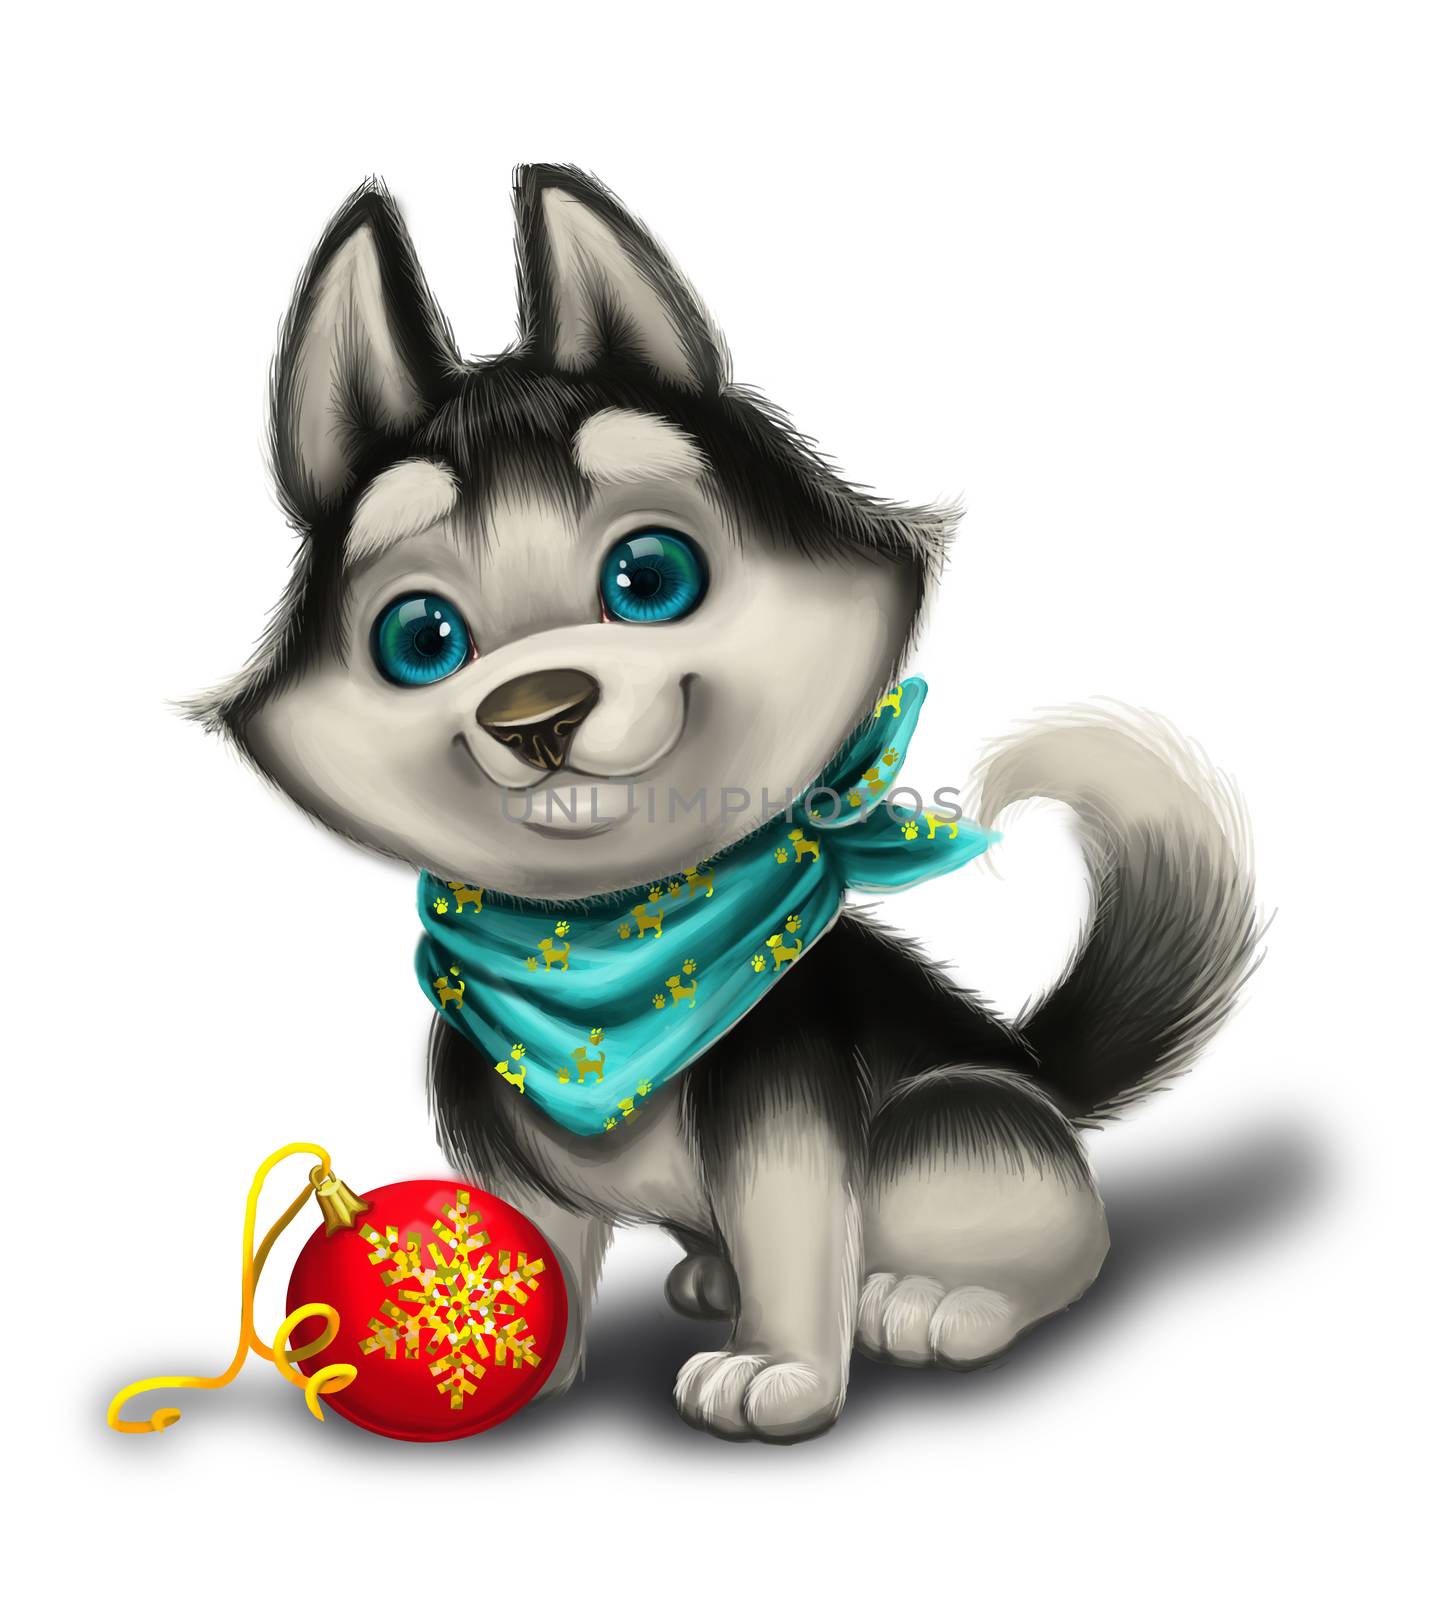 Season's Greetings with Cute Husky Puppy - Merry Christmas and Happy New Year by Loud-Mango